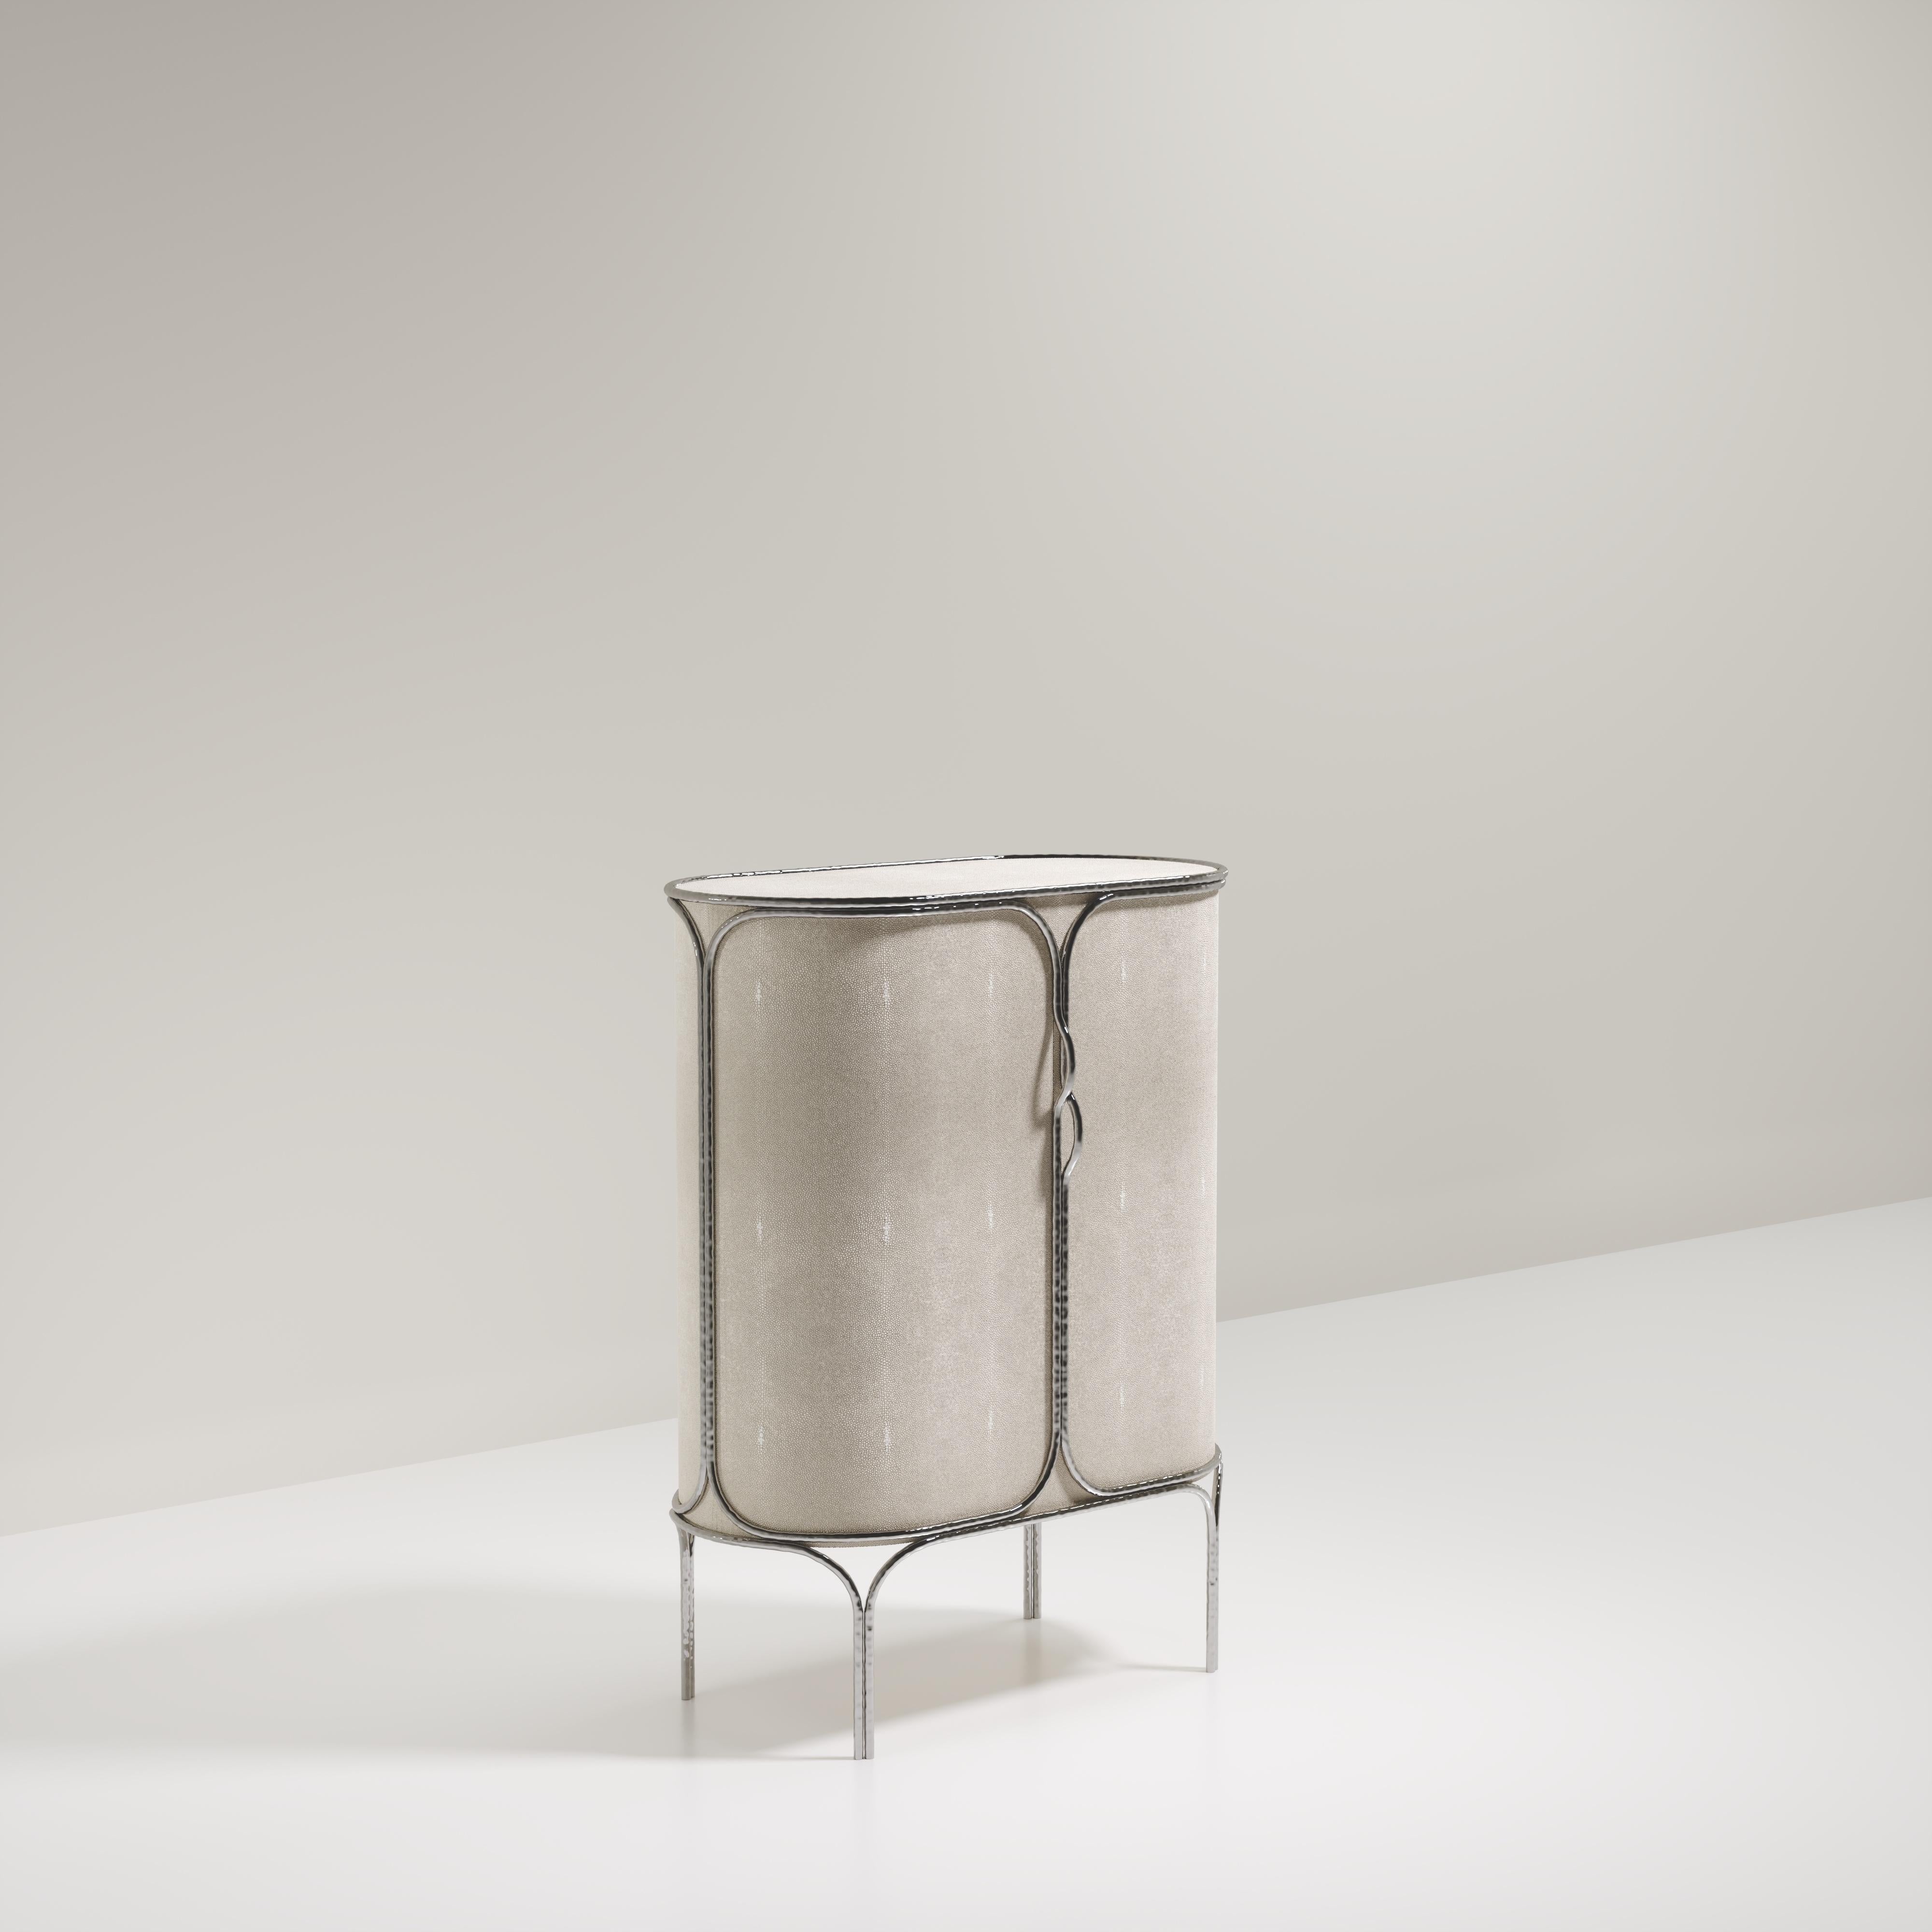 The Arianne bar cabinet by R&Y Augousti is one of a kind statement piece. The overall piece is inlaid in cream shagreen accentuated with intricate chrome finish polished stainless steel details that have the signature Augousti 